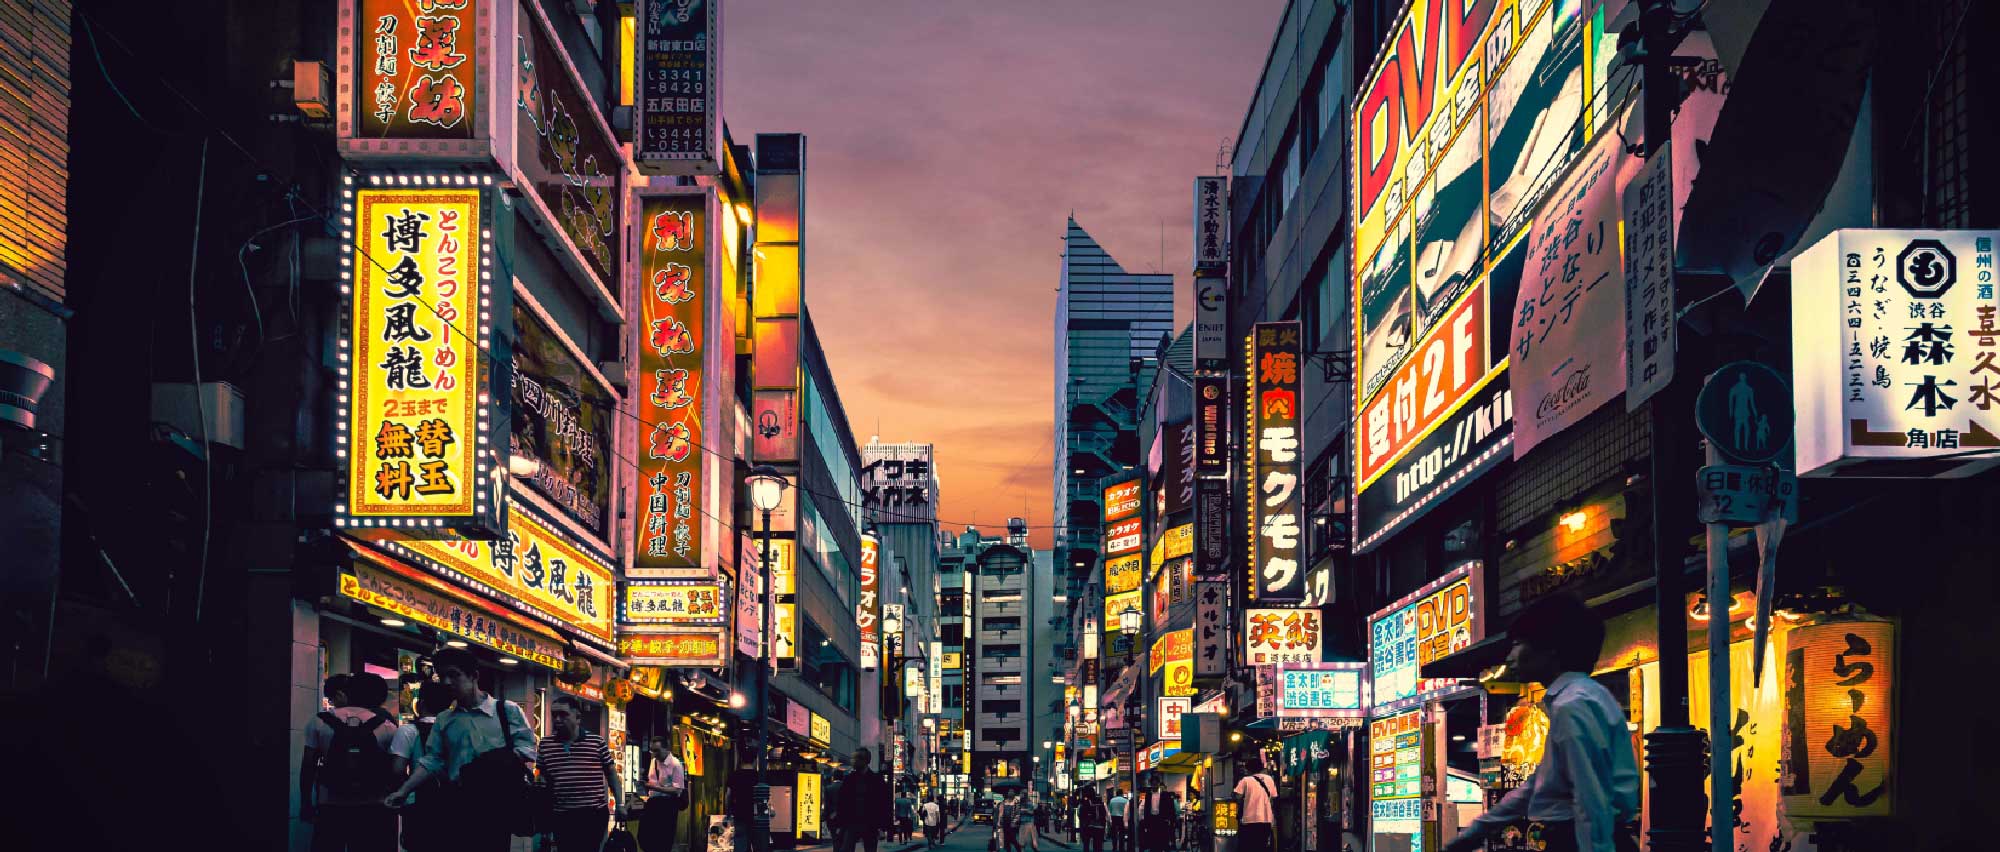 a busy Asian city street in the evening